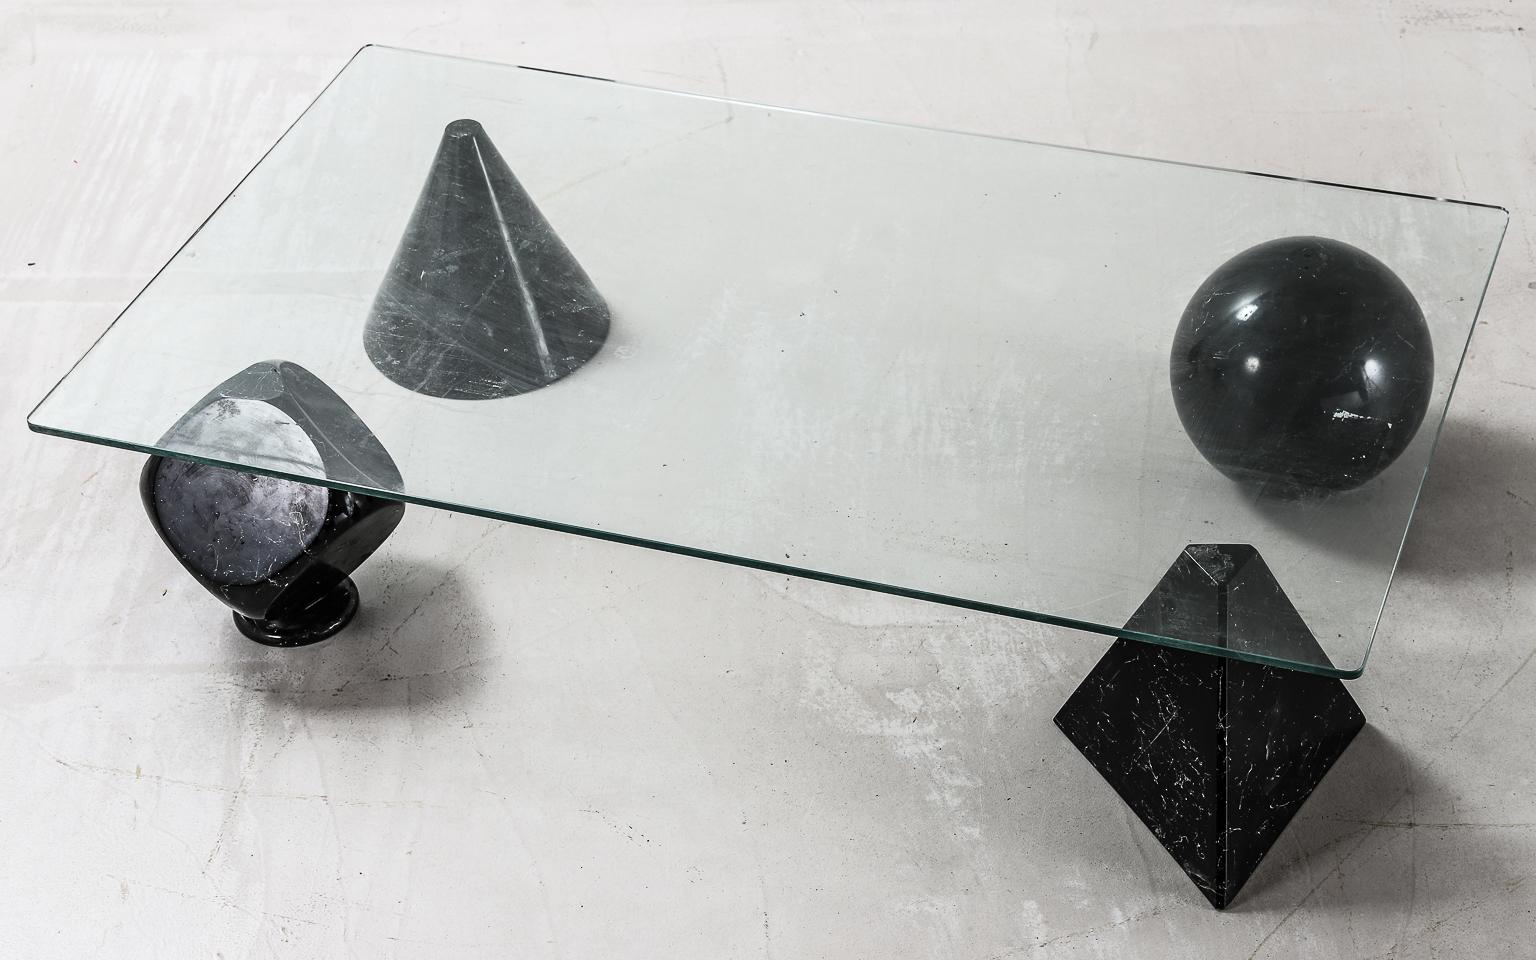  Coffee table from the late 1970s, made up of a glass table top and black with white veins marble effect sculptural bases. Four sculptural bases: a cube, a cone, a sphere and a pyramid. The four shapes are not fixed and can be repositioned freely,